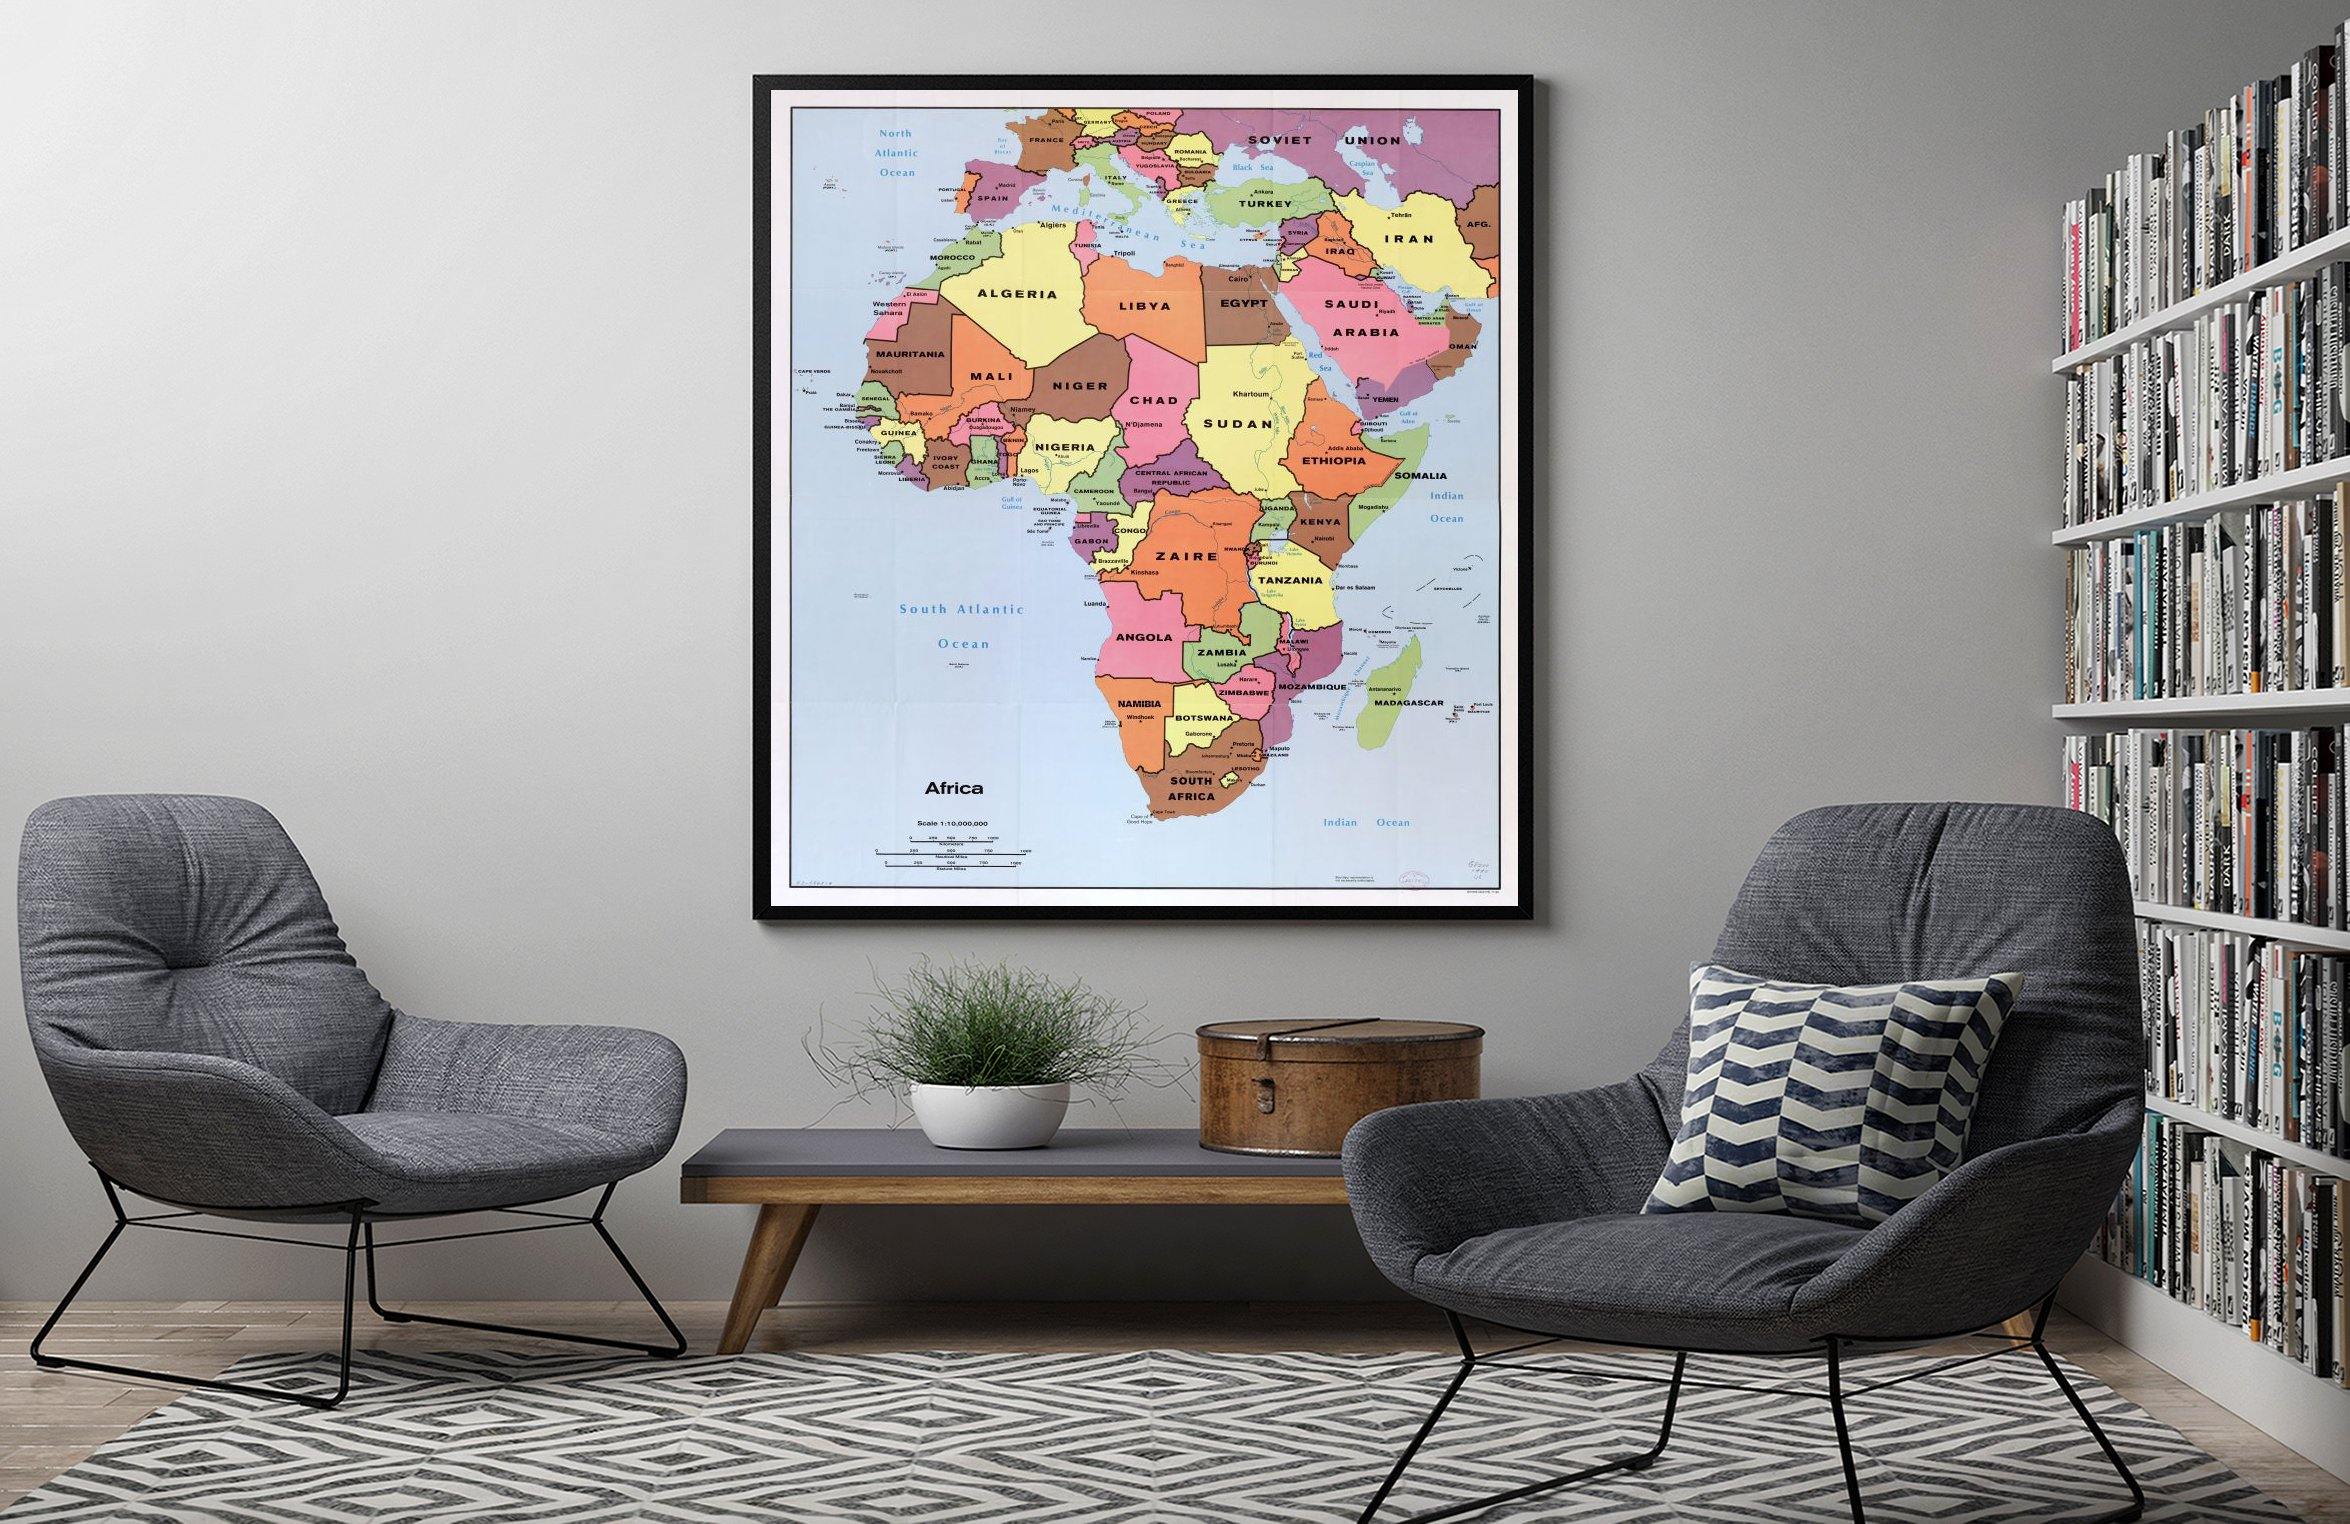 1990 Map| Africa| Africa Map Size: 22 inches x 24 inches |Fits 22x24 s - New York Map Company